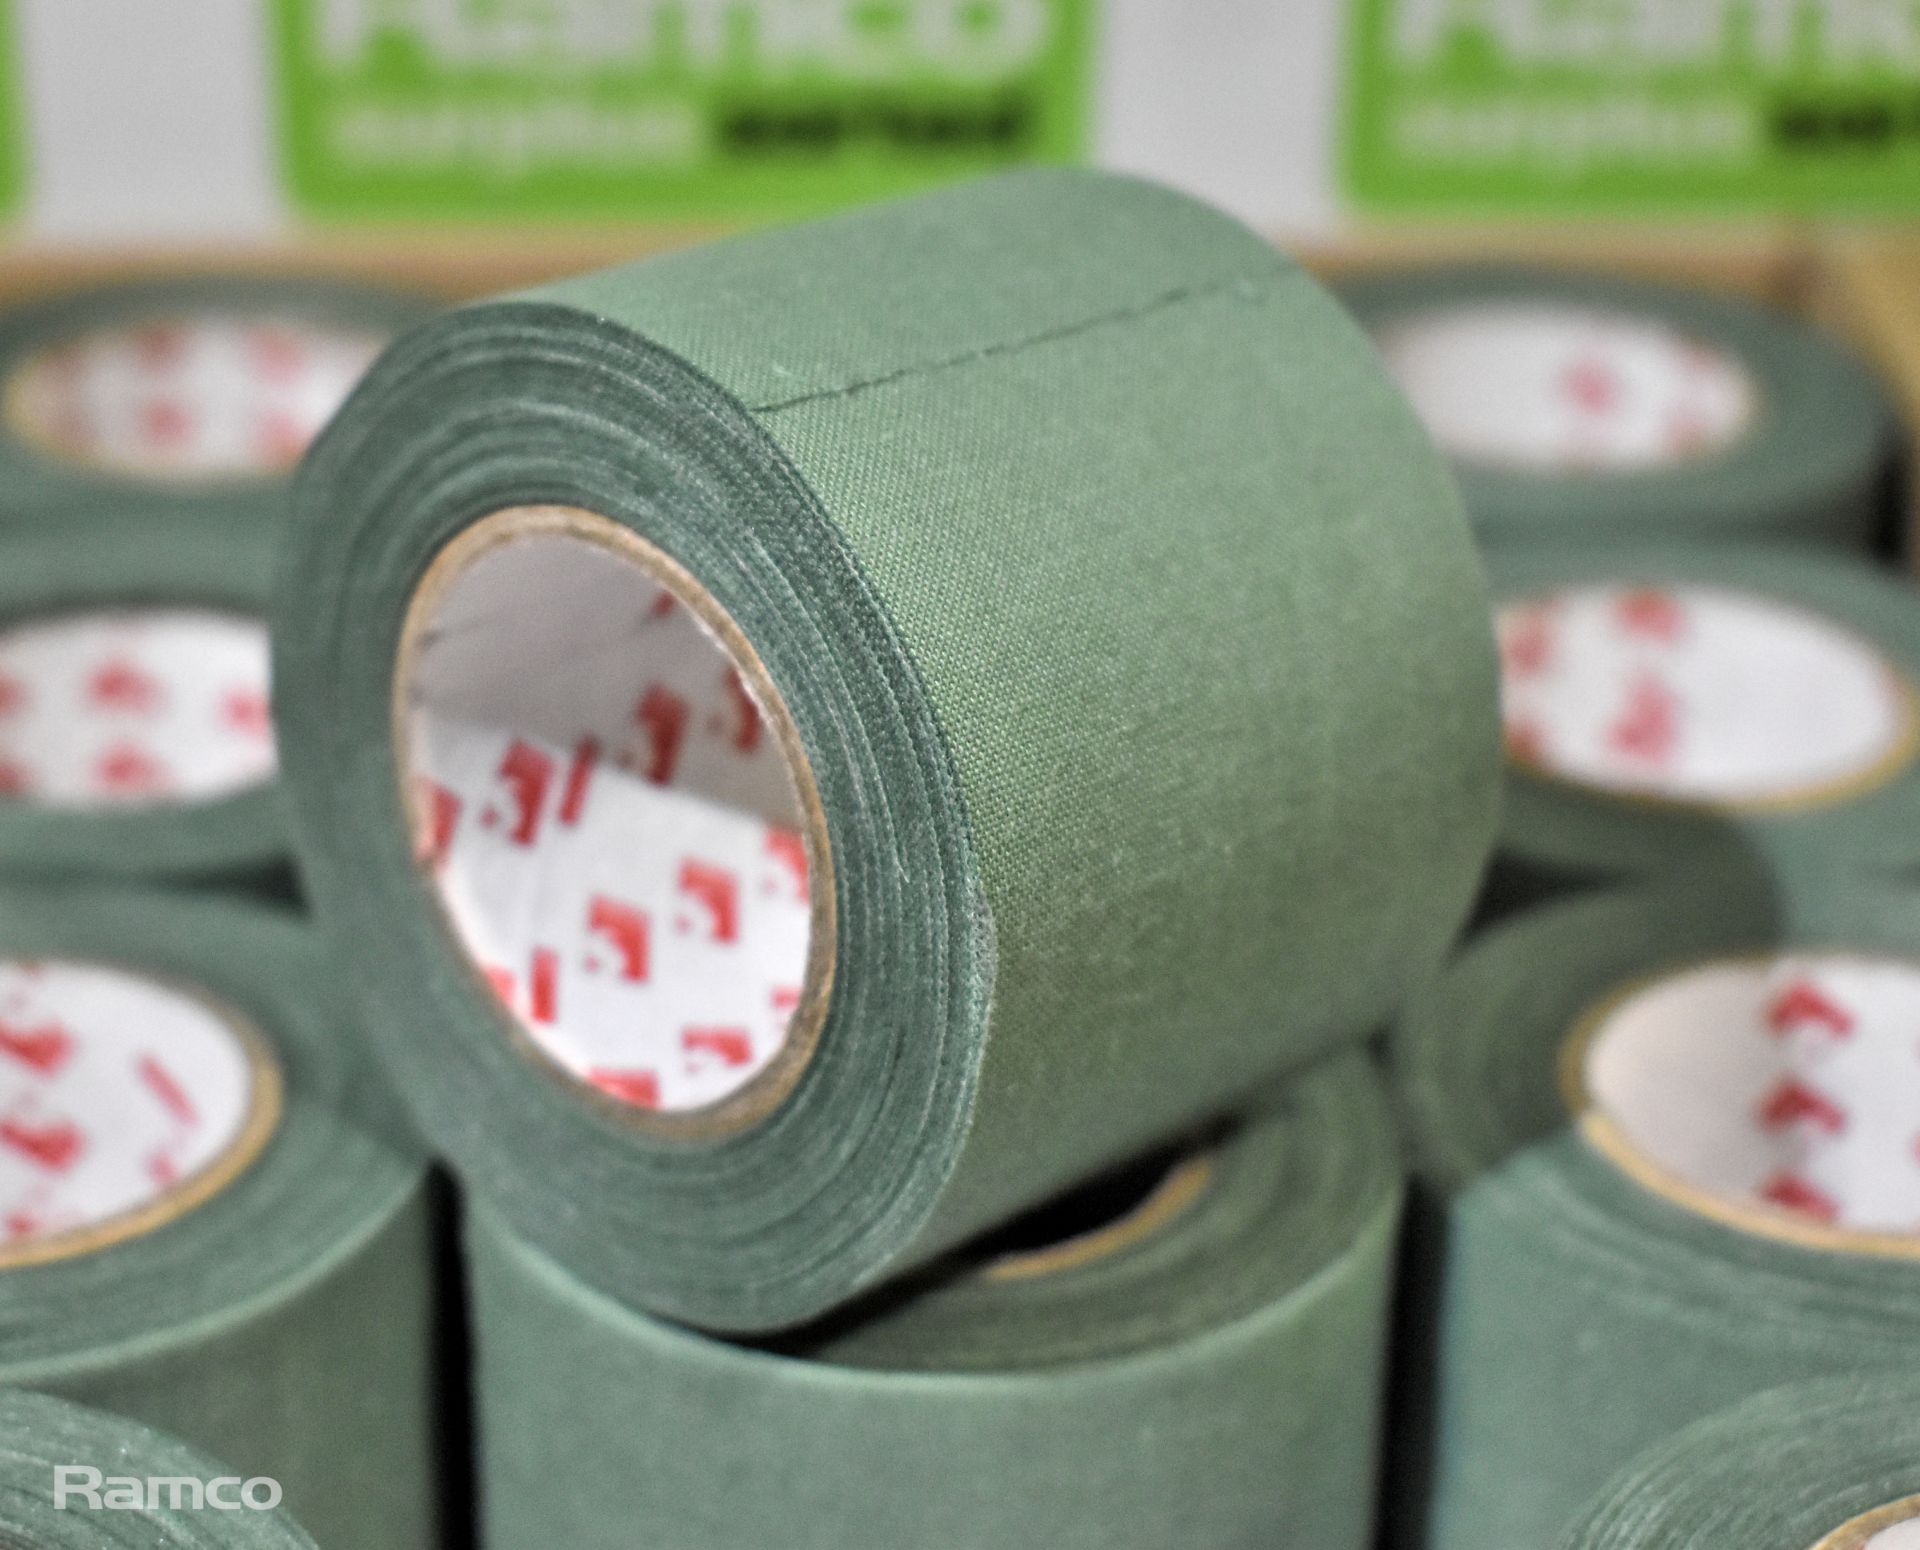 96x rolls of Scapa tape - 50mm x 10m - olive green - Image 2 of 3